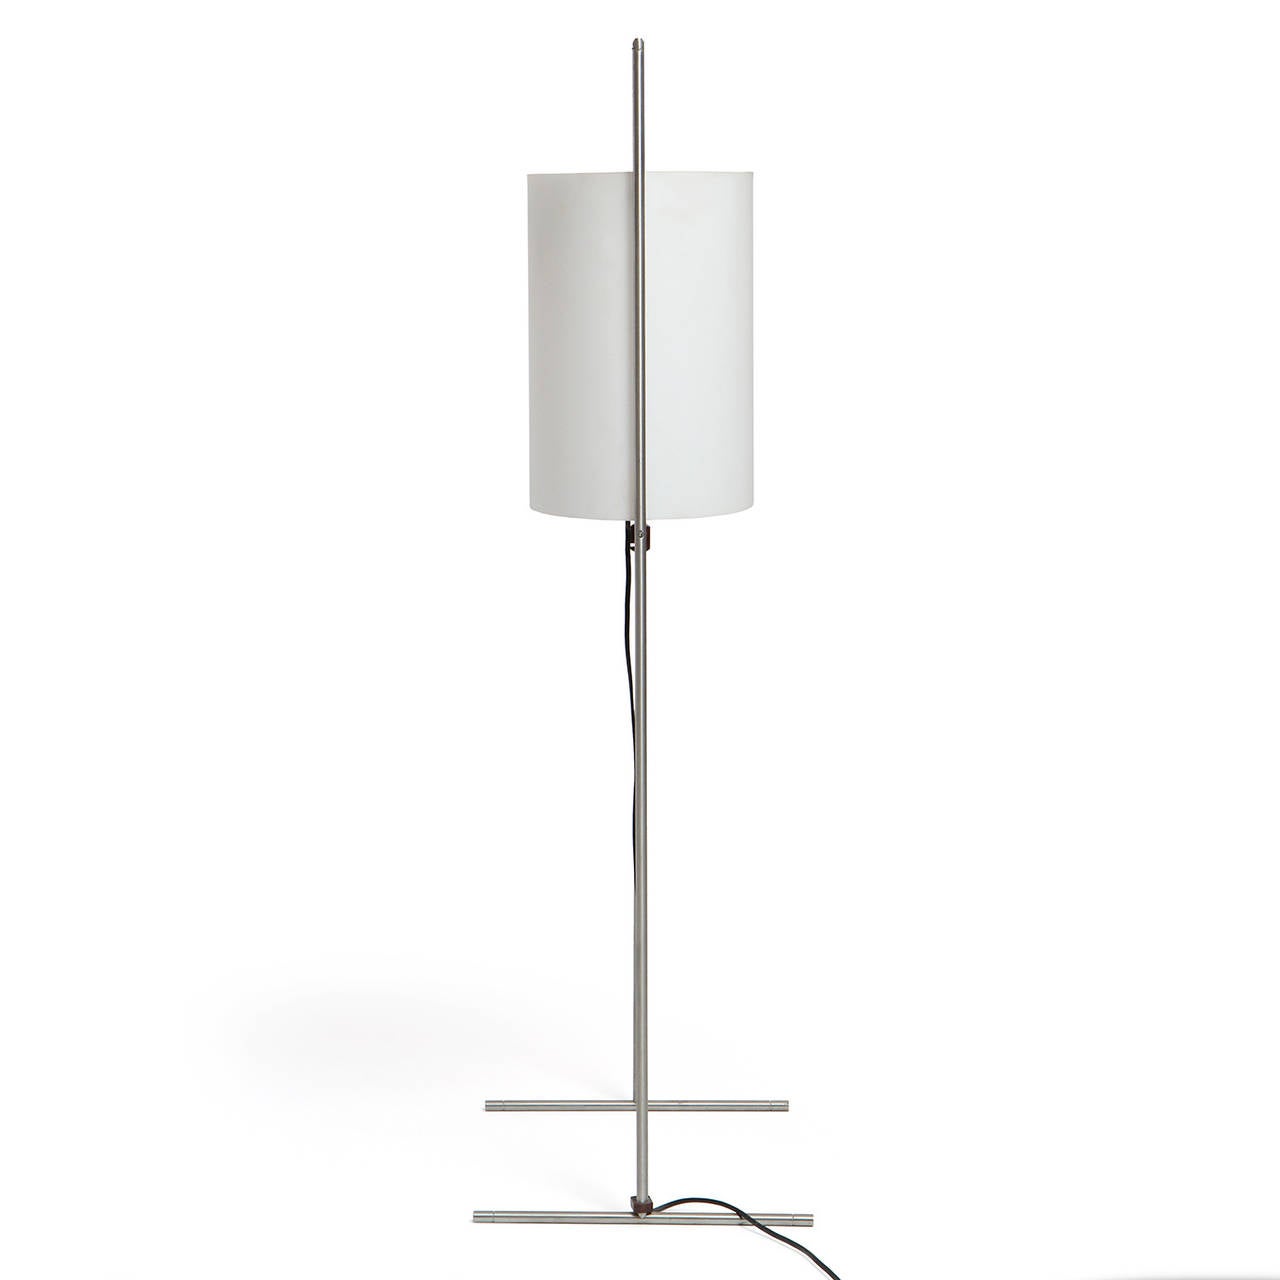 Italian Glass and Steel Floor Lamp In Good Condition For Sale In Sagaponack, NY